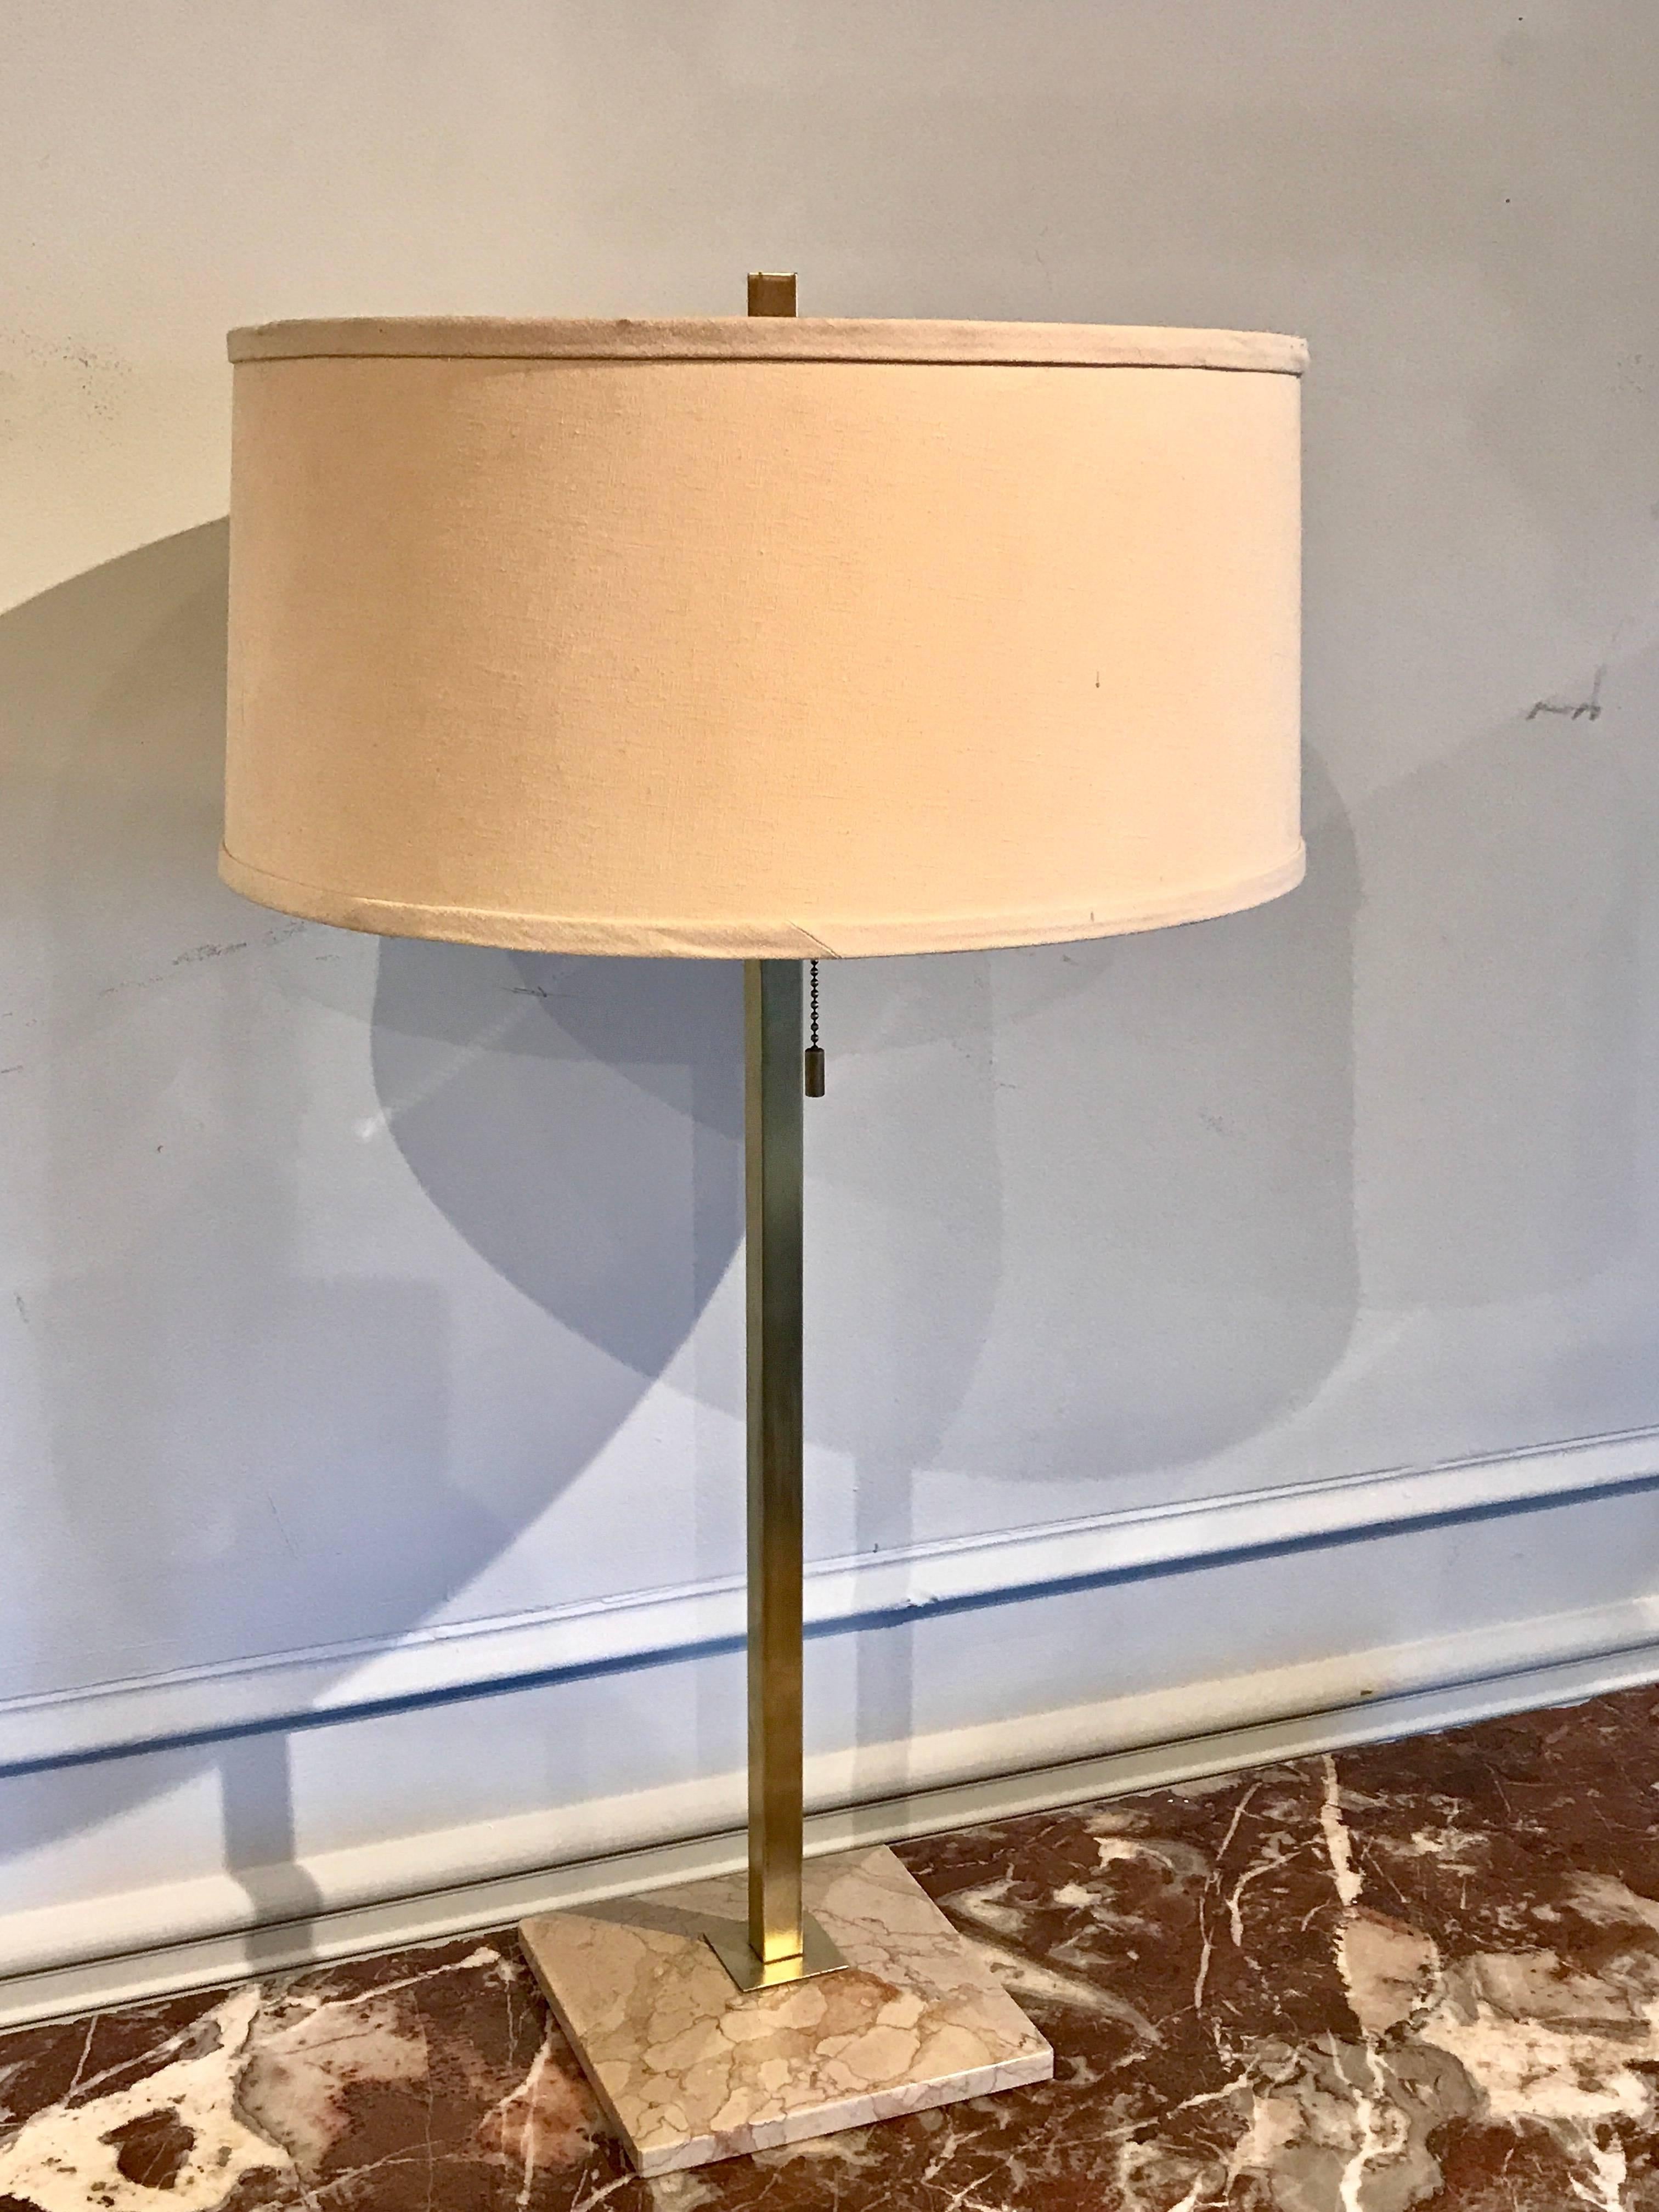 Midcentury brass and marble lamp by Stiffel, shade is original and included 
Measures: 16